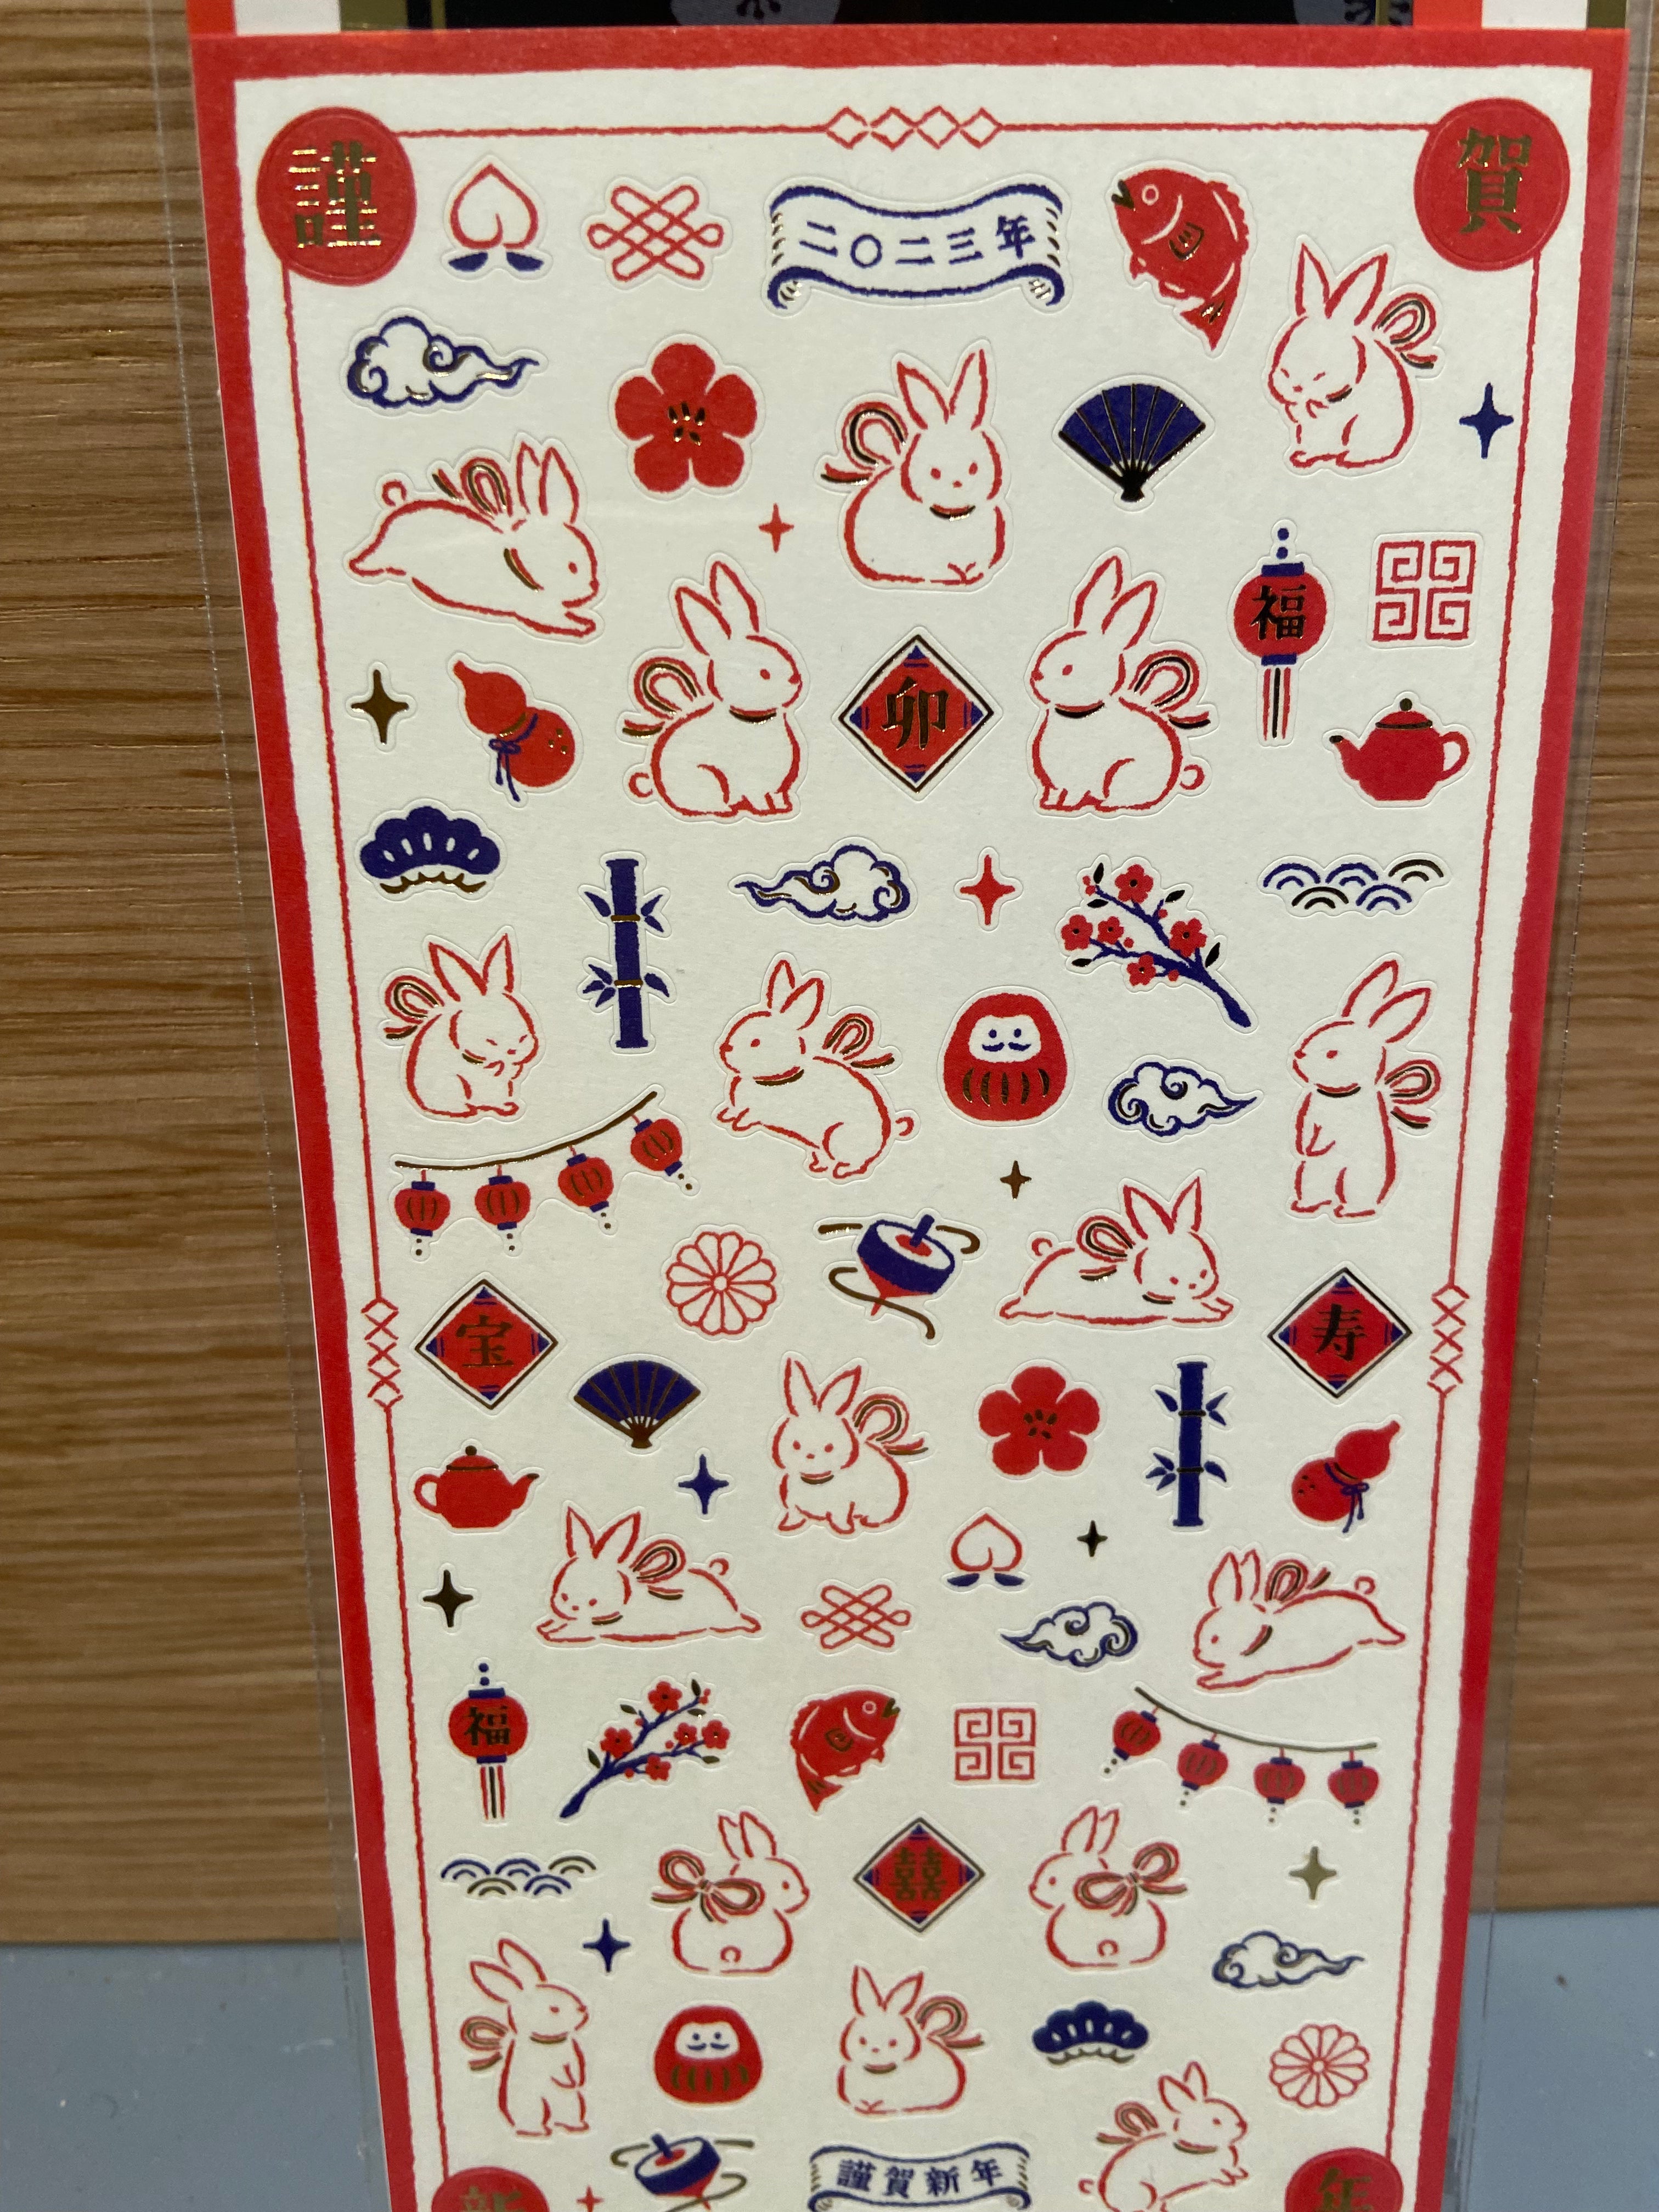 Stickers, Japanese motifs and rabbits